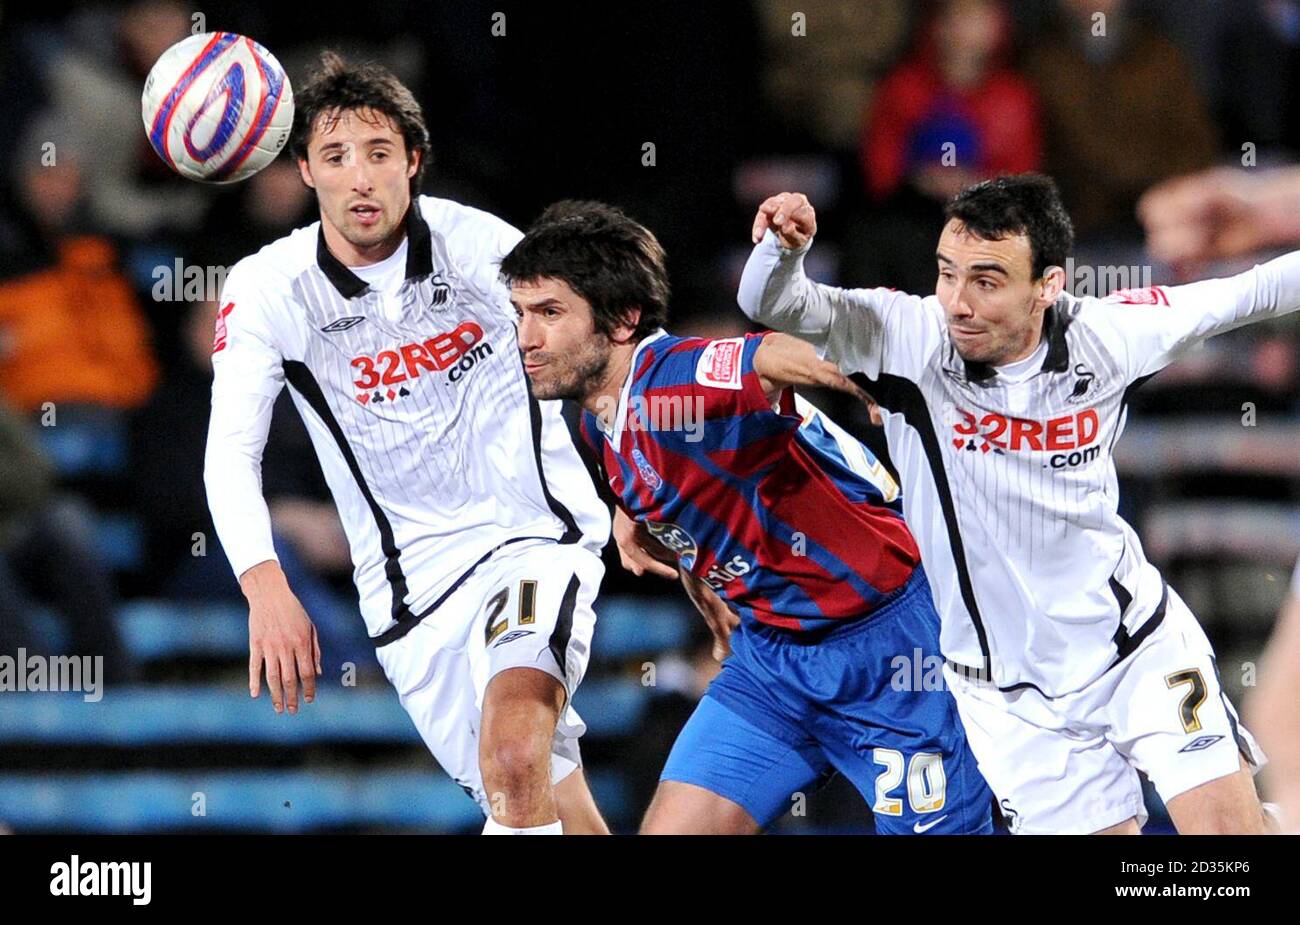 Swansea's Fede Bessone (left), Crystal Palace's Danny Butterfield and Swansea's Leon Britton (right) in action during the Coca-Cola Championship match at Selhurst Park, London. Stock Photo